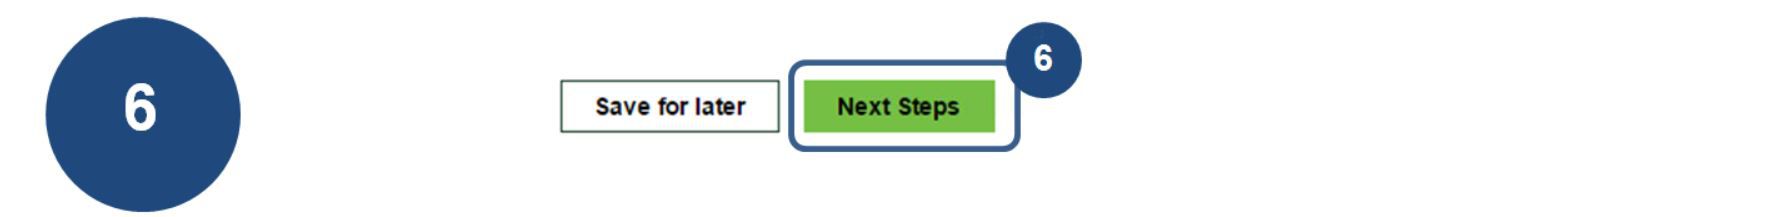 6. When you have finished your review, click on ‘Next Steps’ at the bottom of the page.